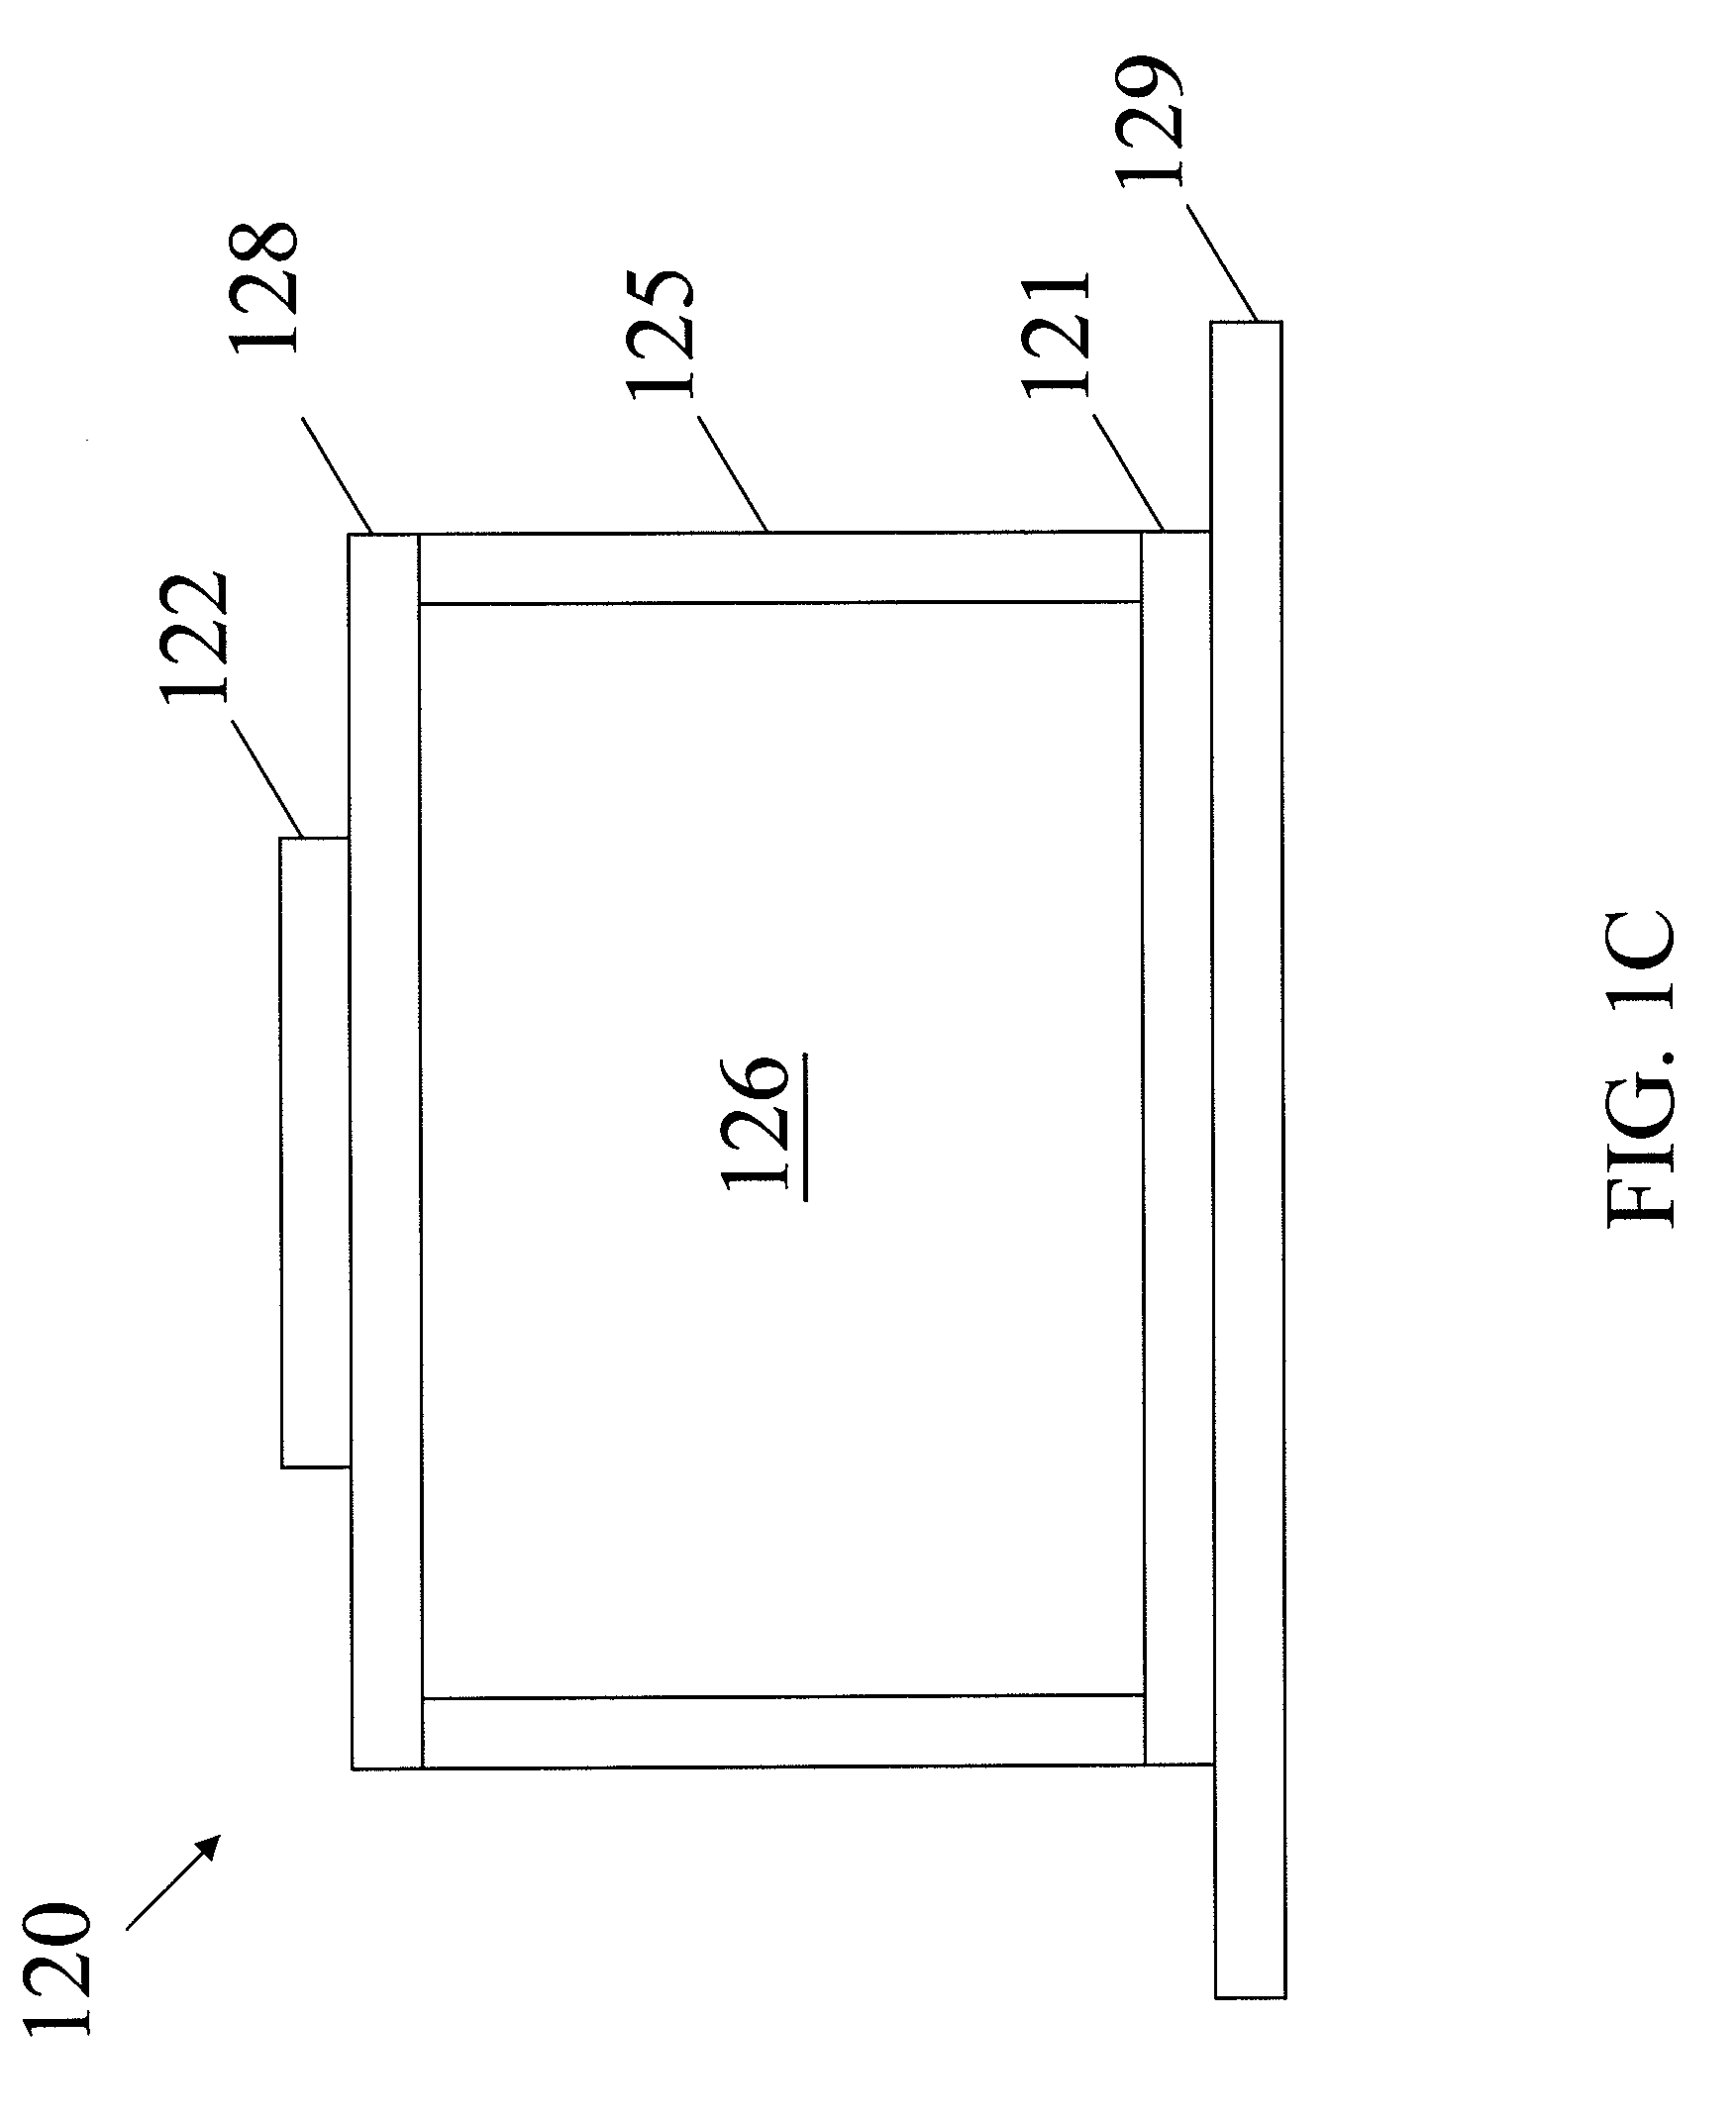 Capacitive Ultrasonic Sensors and Display Devices Using the Same